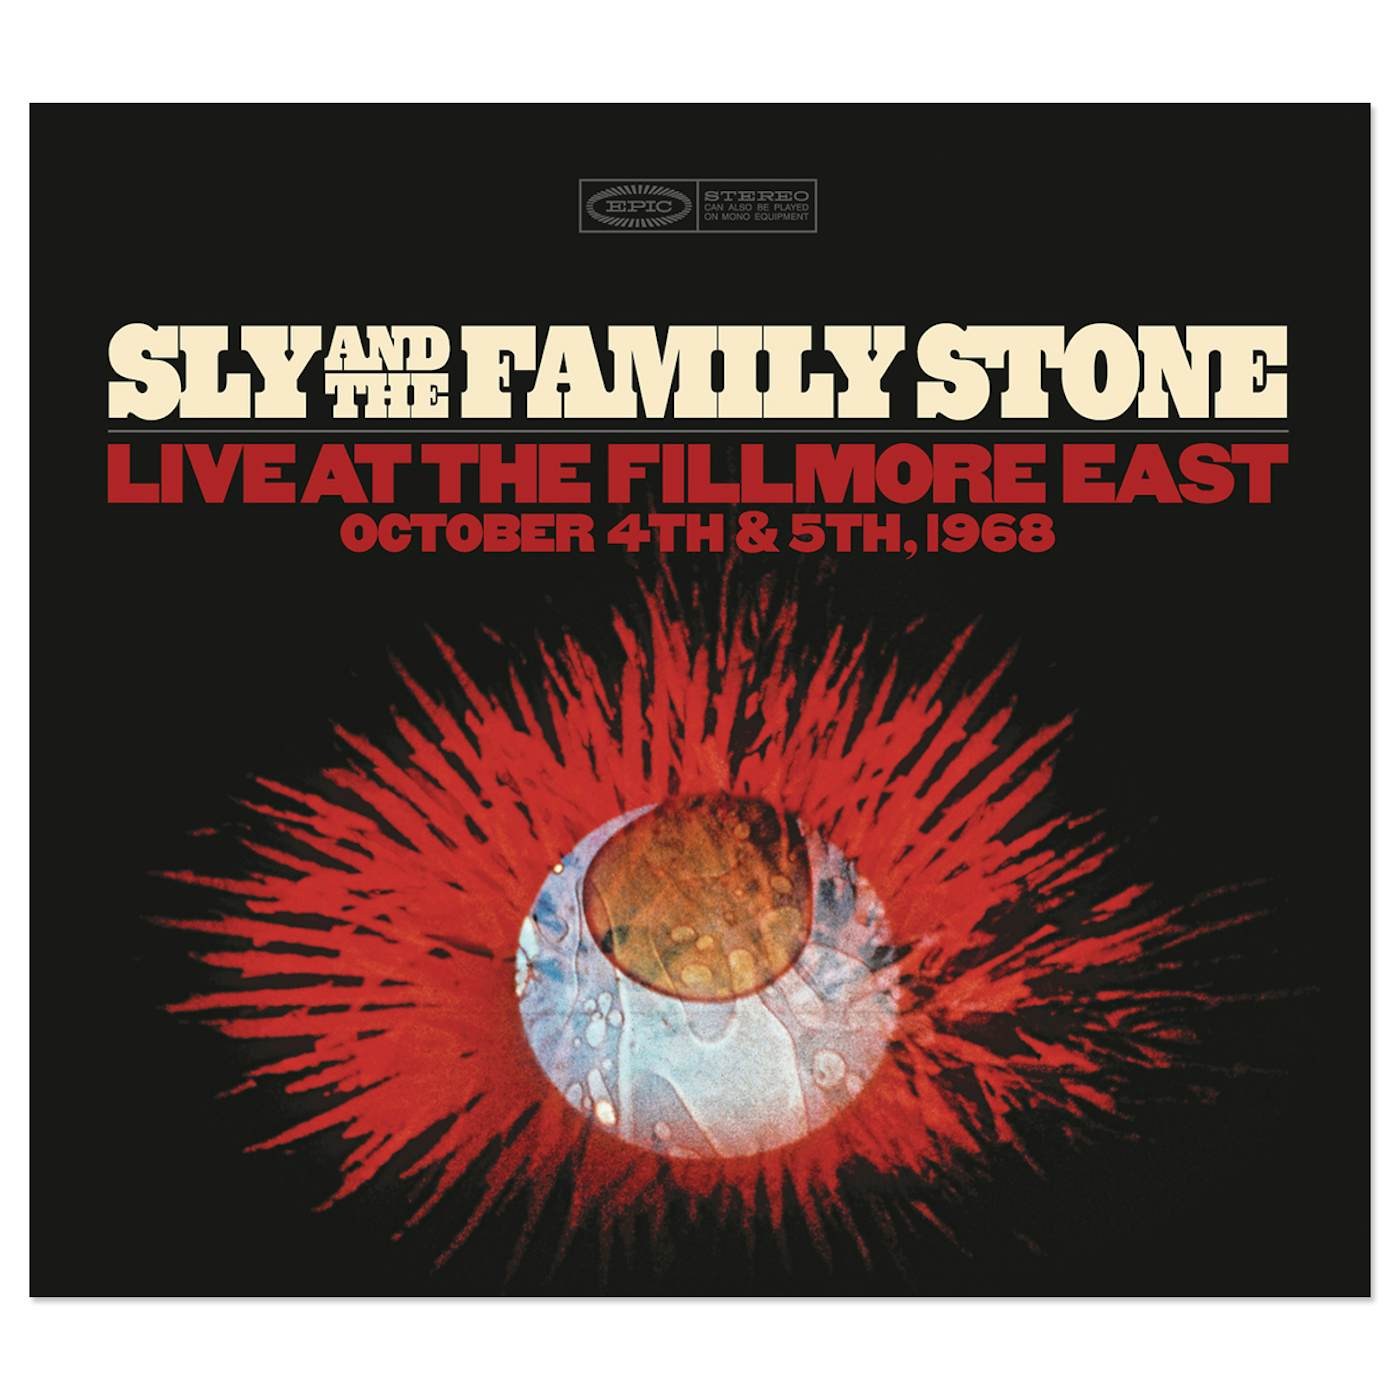 Sly & The Family Stone Live At The Fillmore East October 4th & 5th 1968 CD